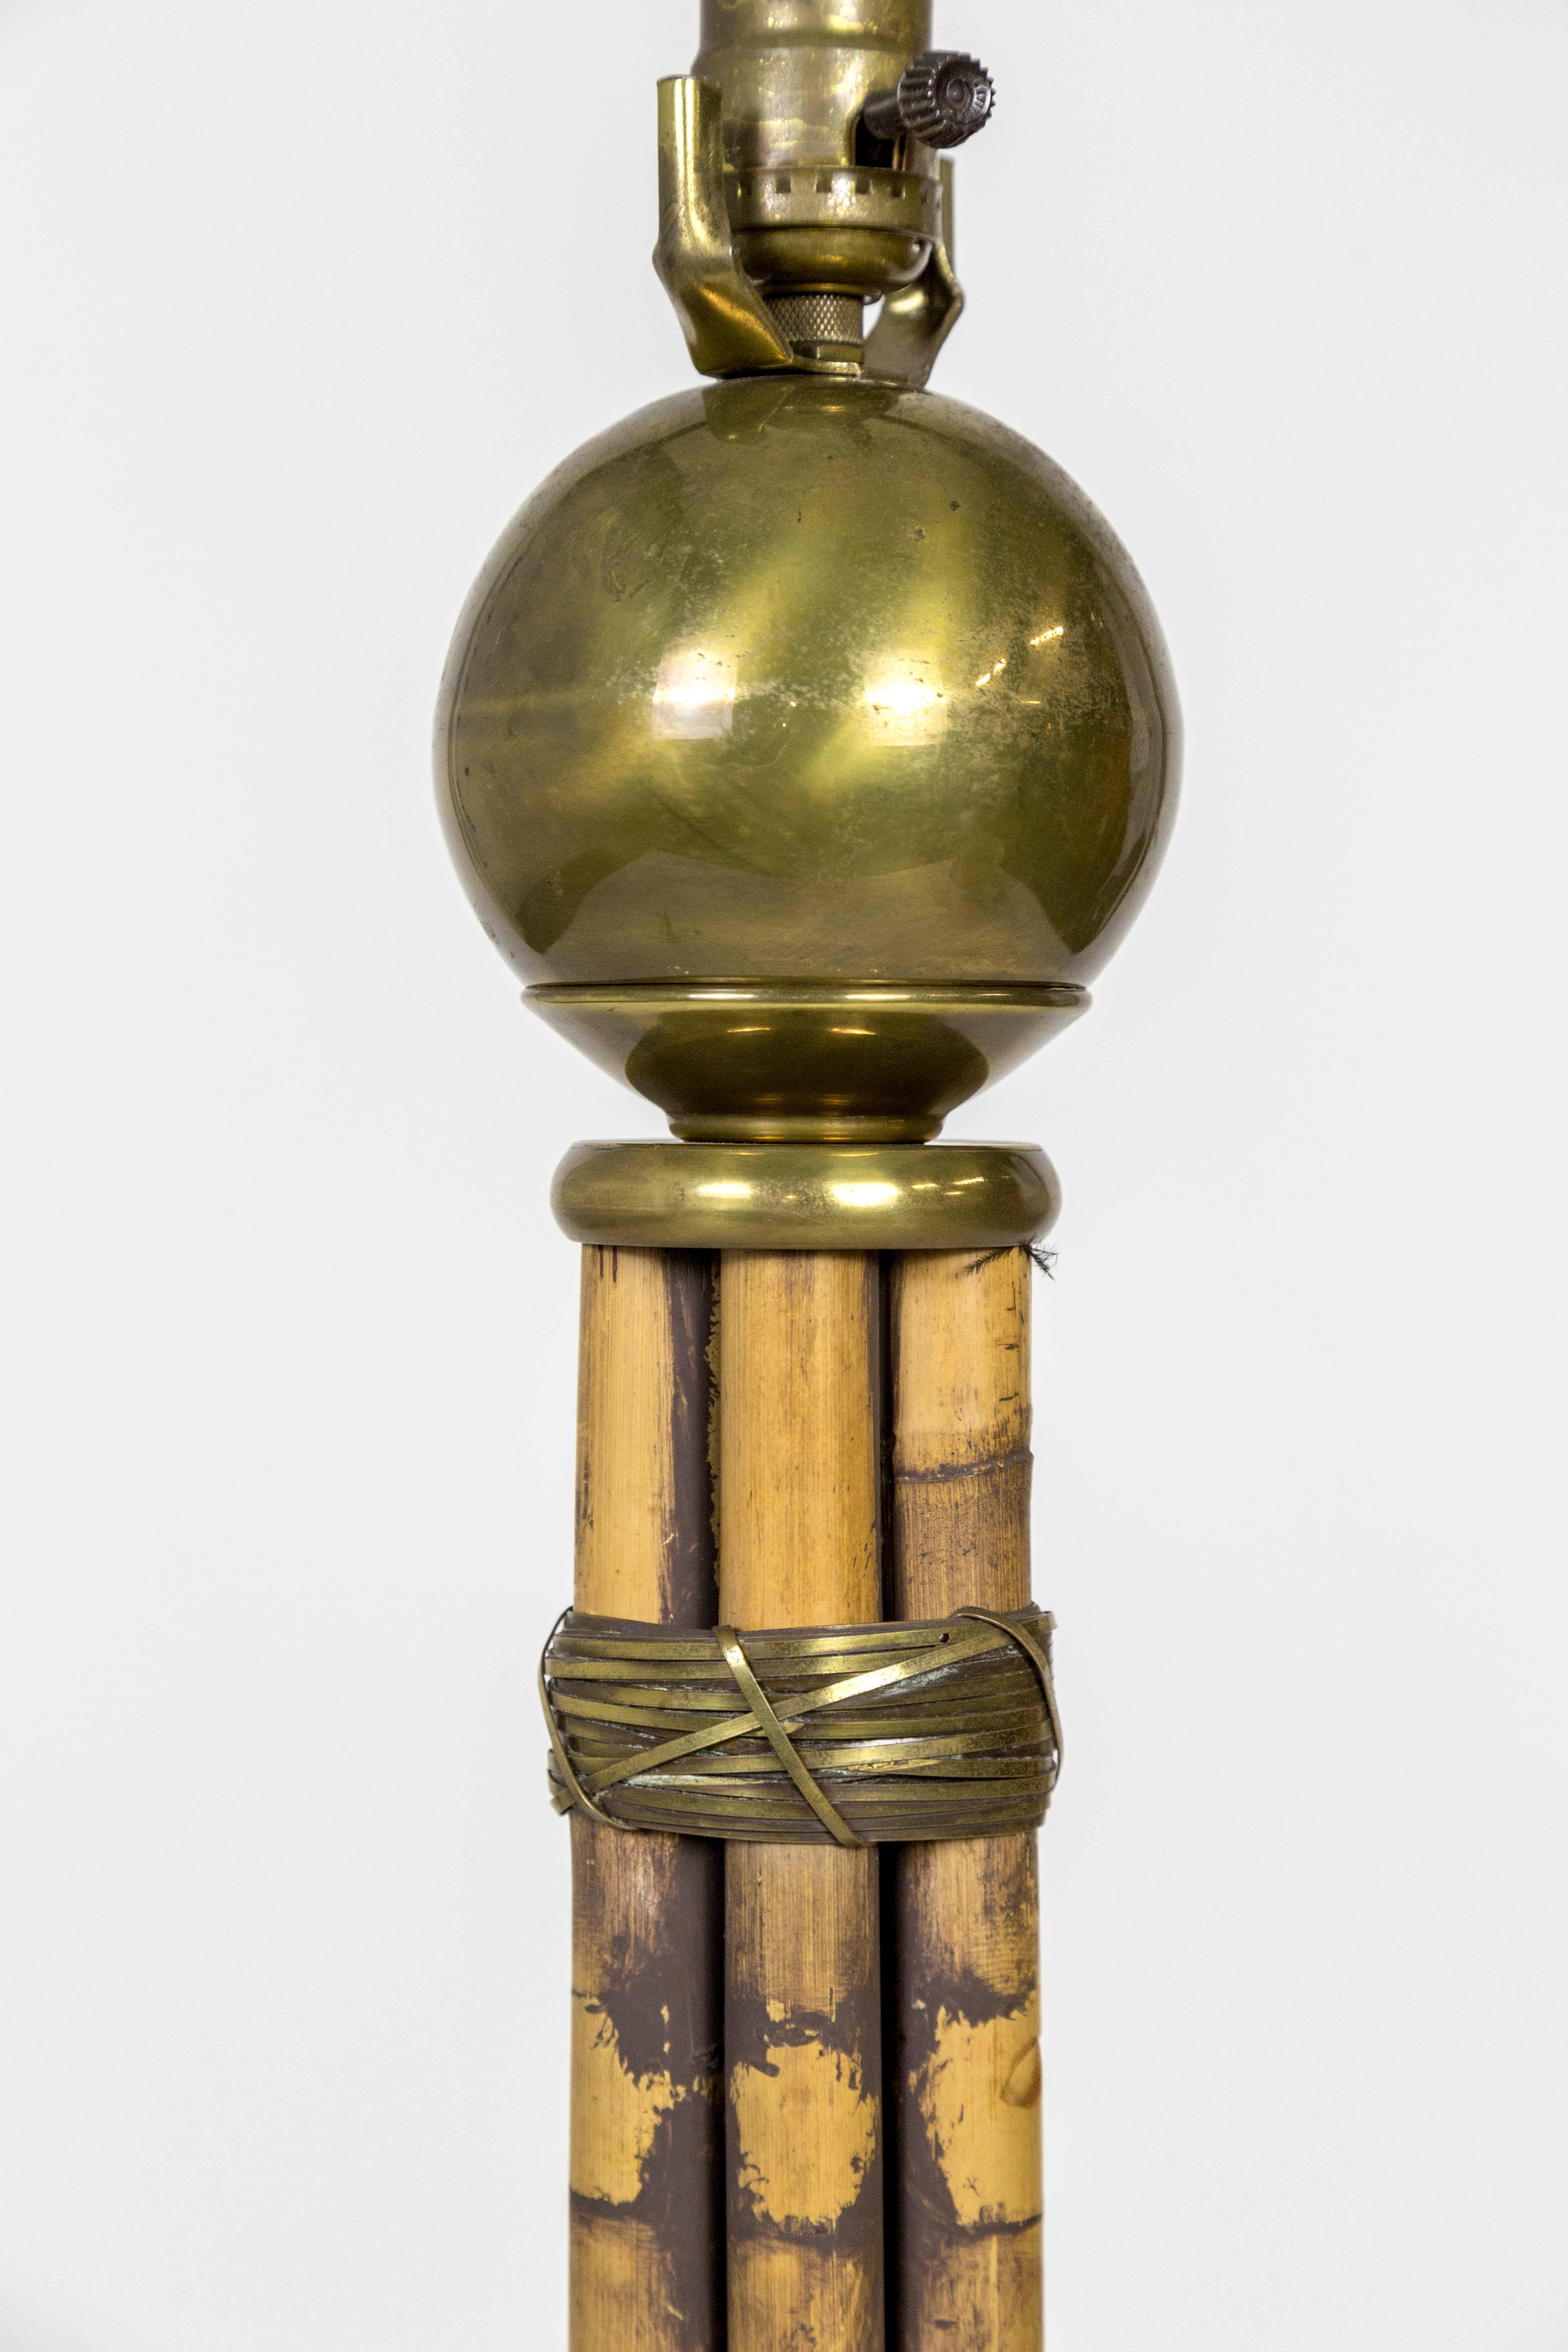 A modern, mid-20th century floor lamp of bamboo stalks artfully bound with brass wire and capped with a brass ball under the socket. Weighted brass base; rewired. Measures: 10.75